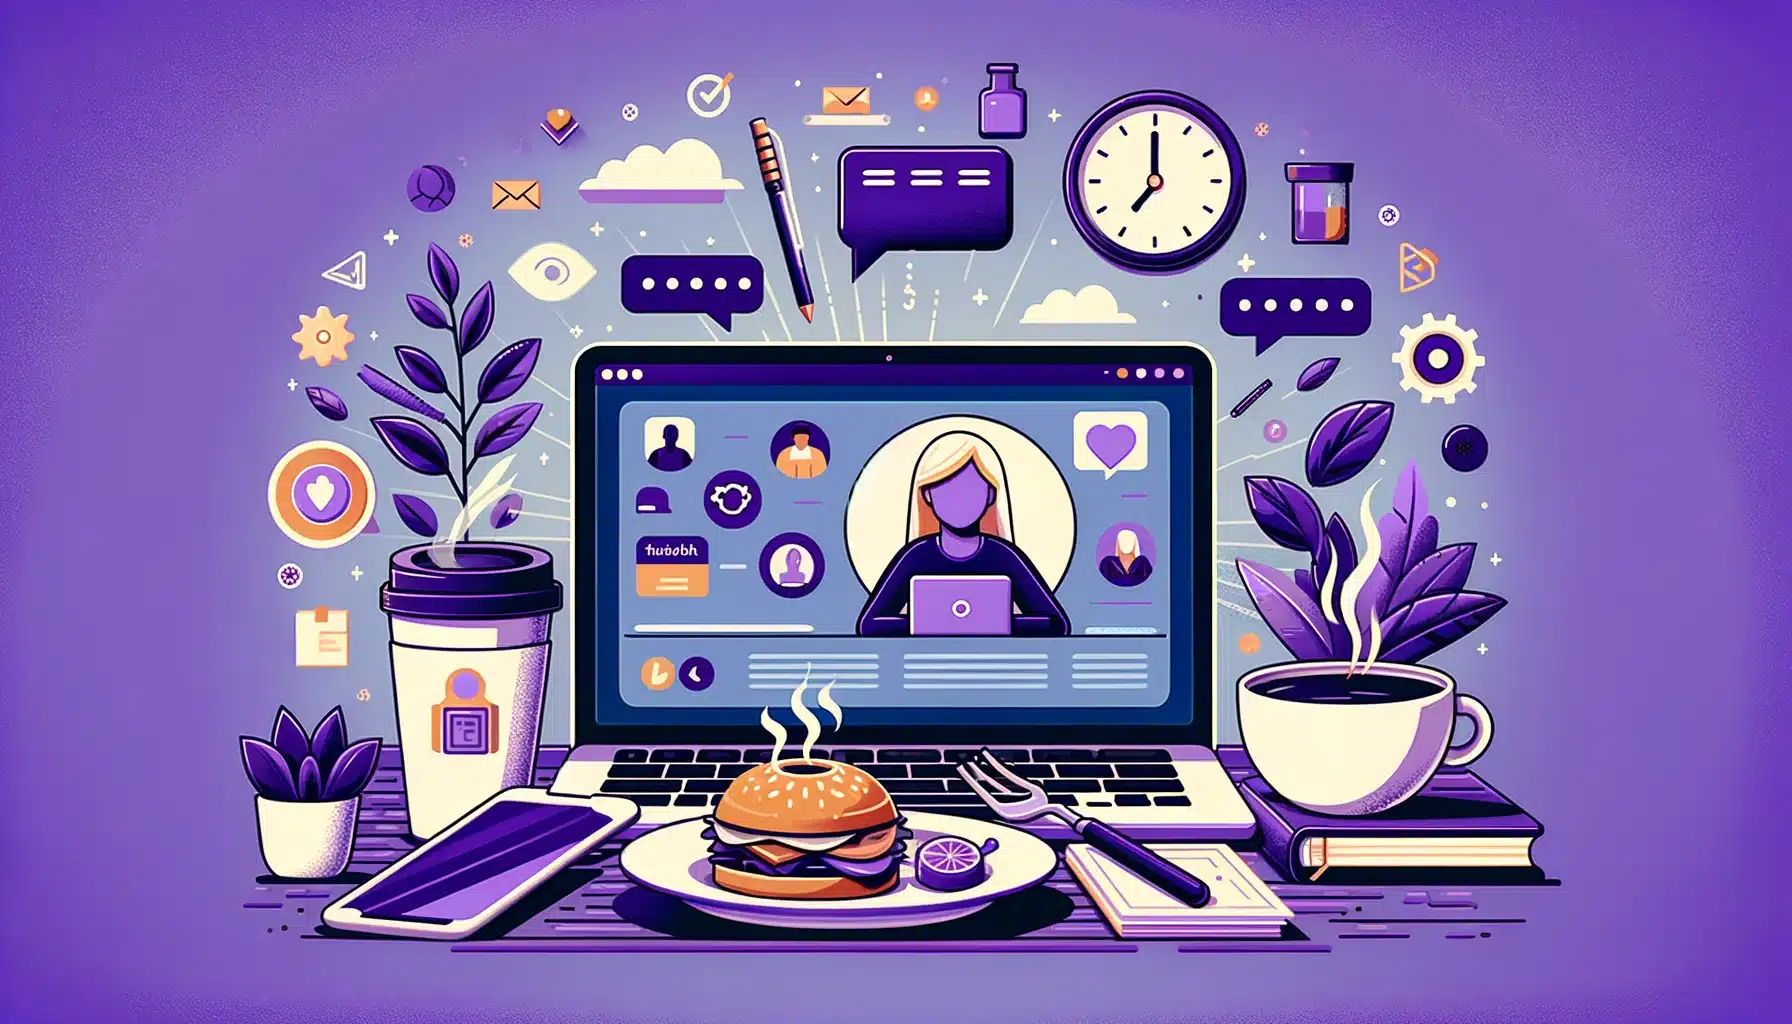 Reduce Burnout and Boost Connection - A featured image for an article about reducing burnout and boosting connection through lunch breaks in remote work settings.